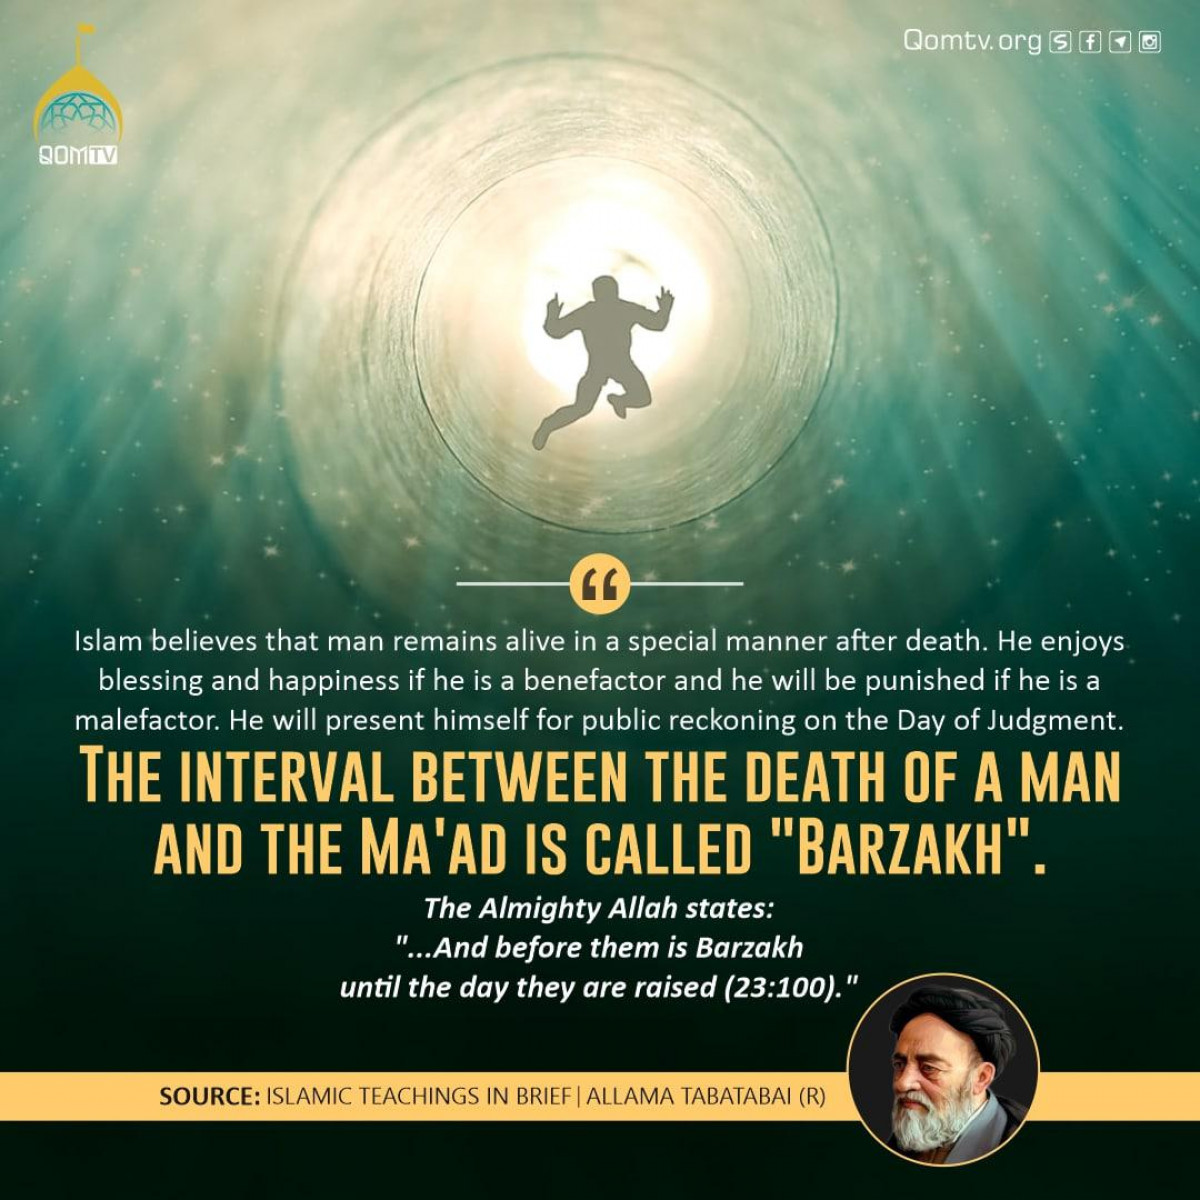 Islam believes that man remains alive in a special manner after death